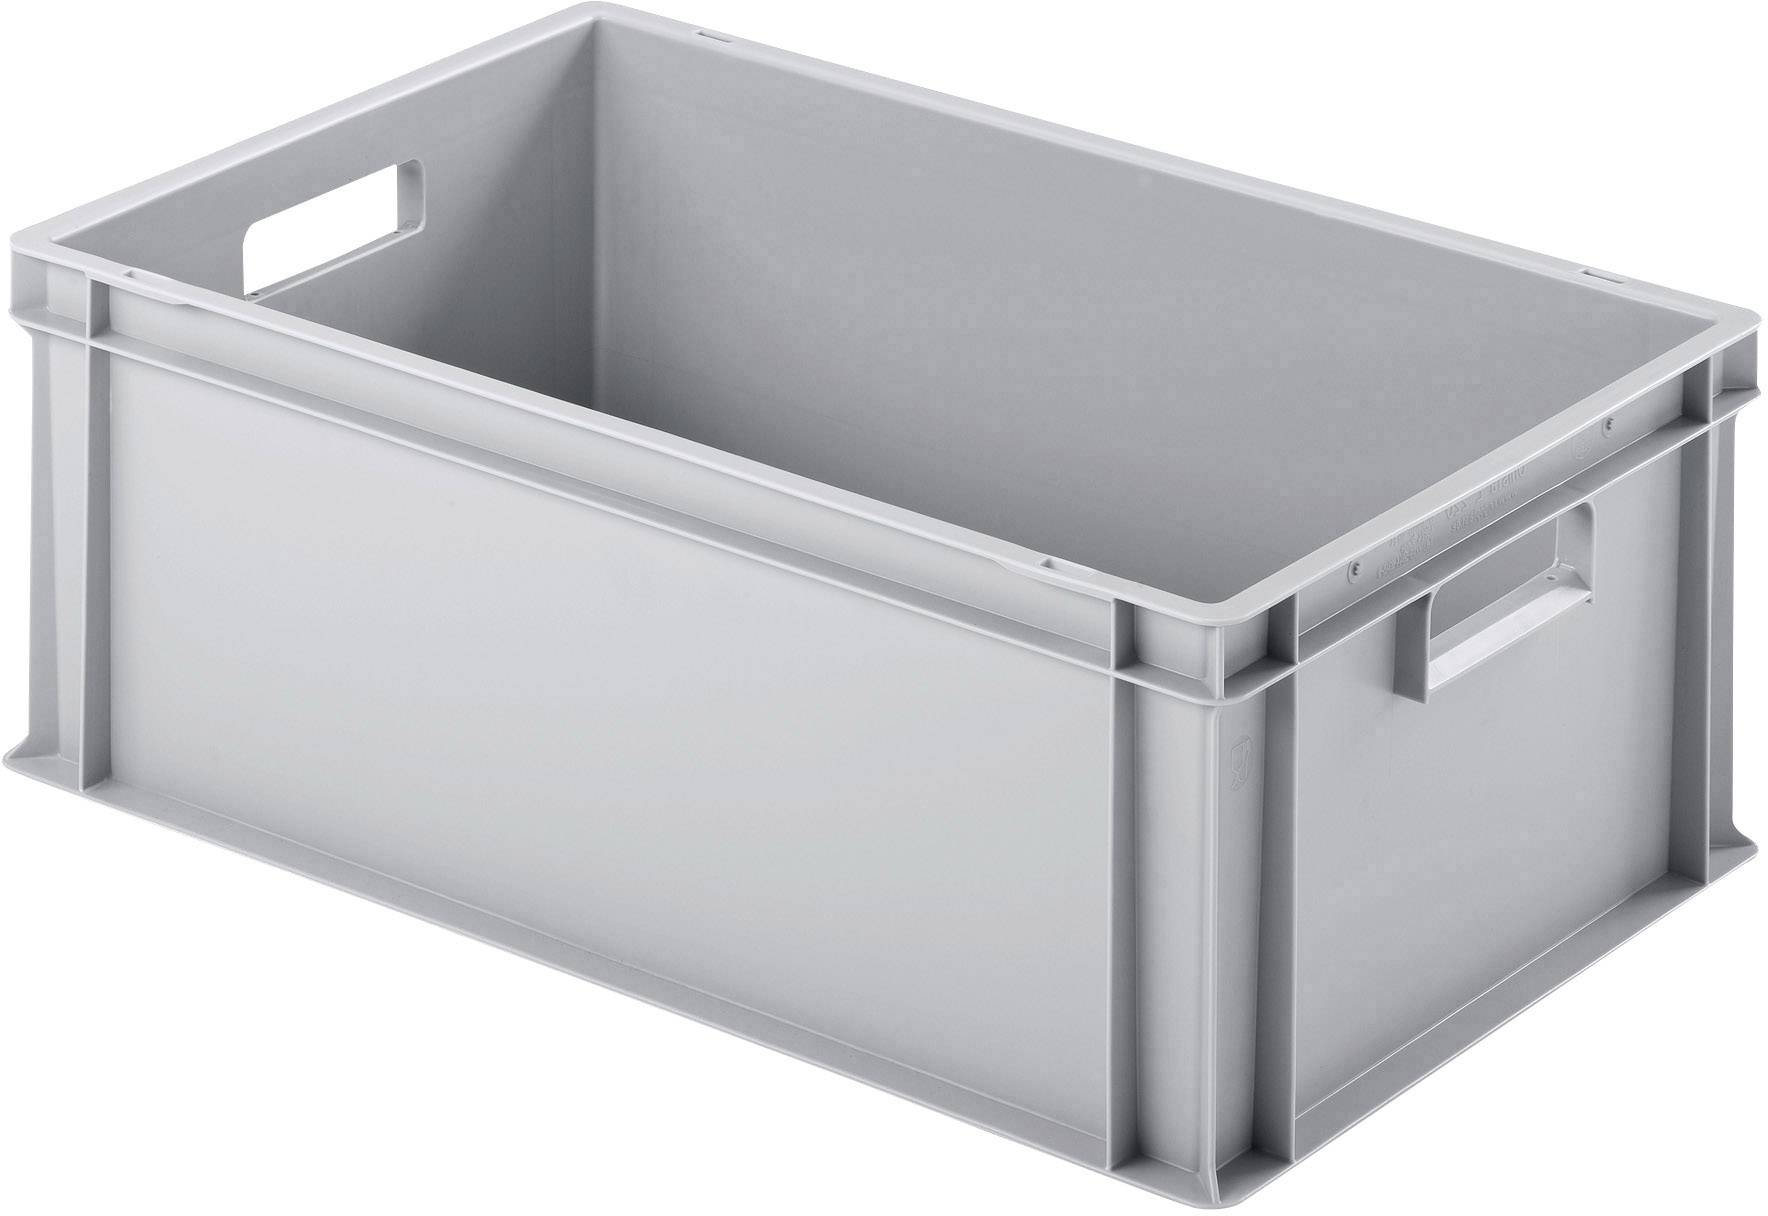 Euro Containers Grey 600 x 400 x 220 MM 